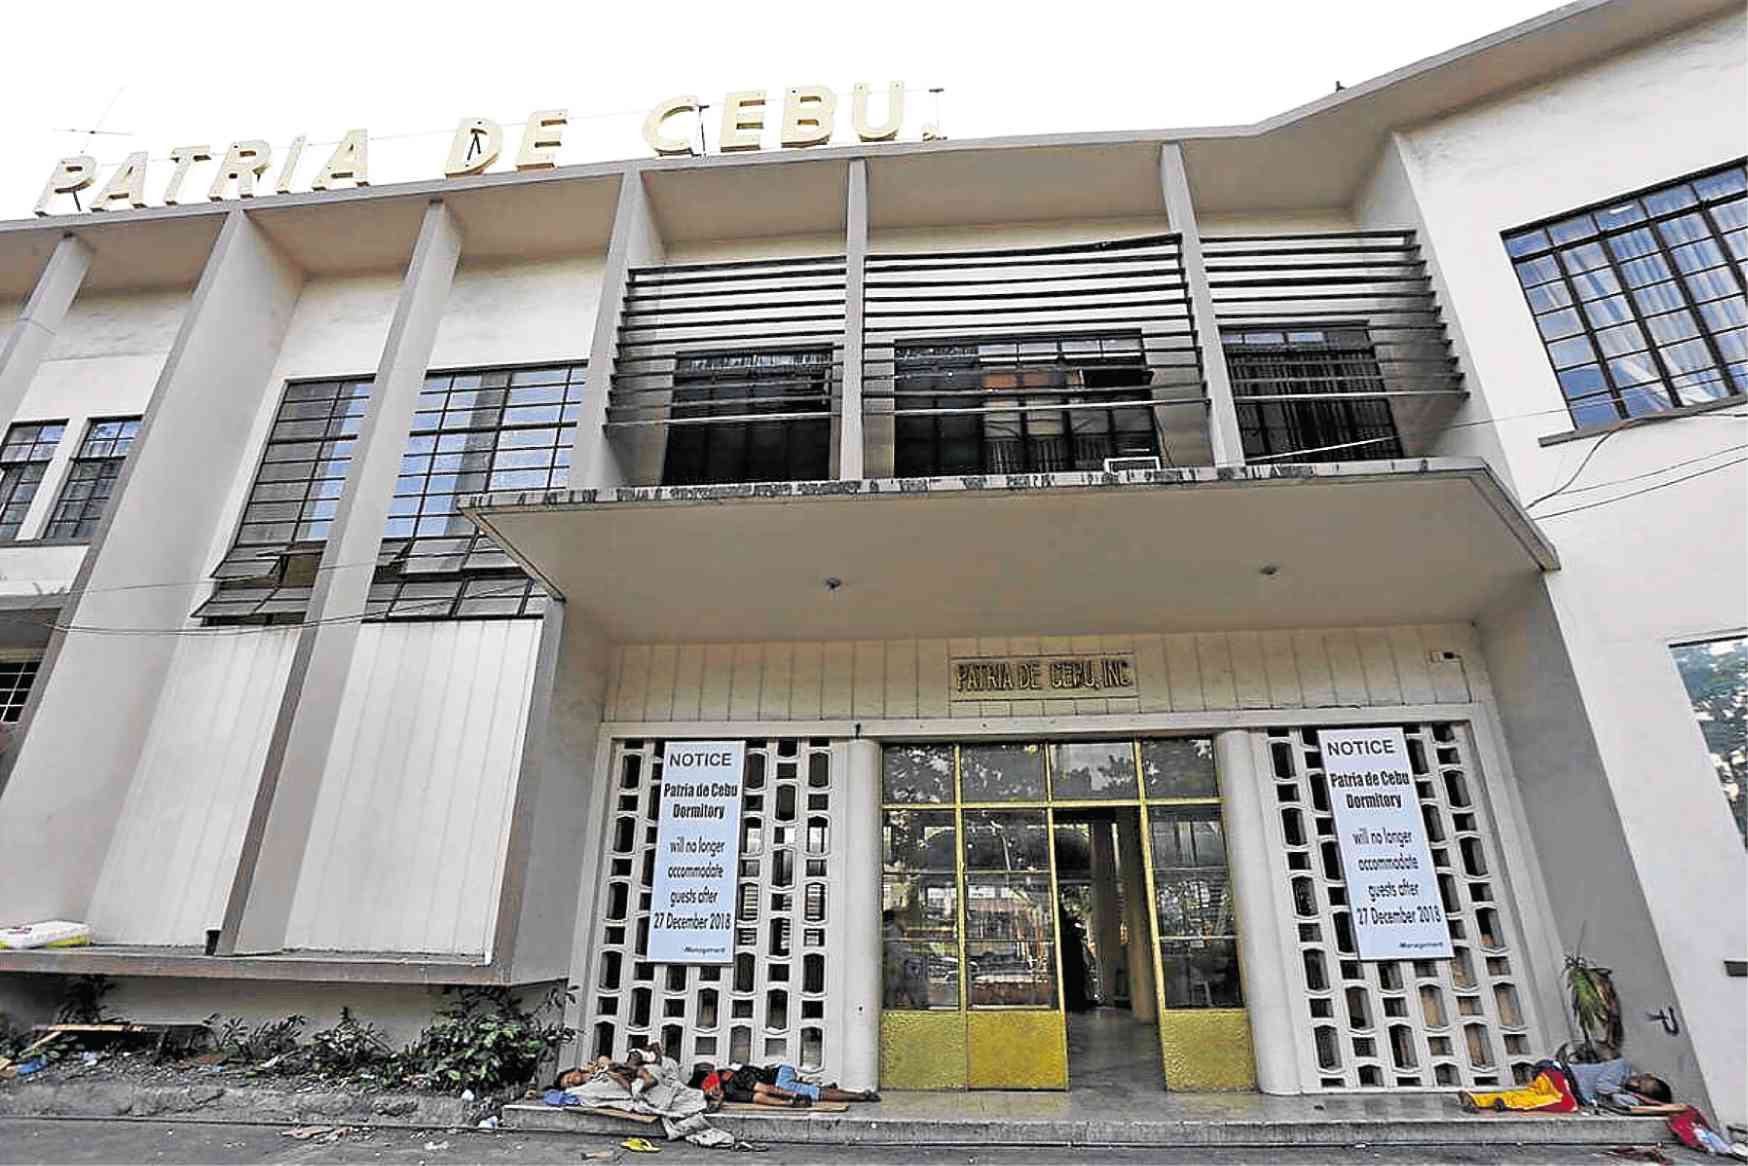 In Cebu, Church-owned building gives way to business spaces | Inquirer News